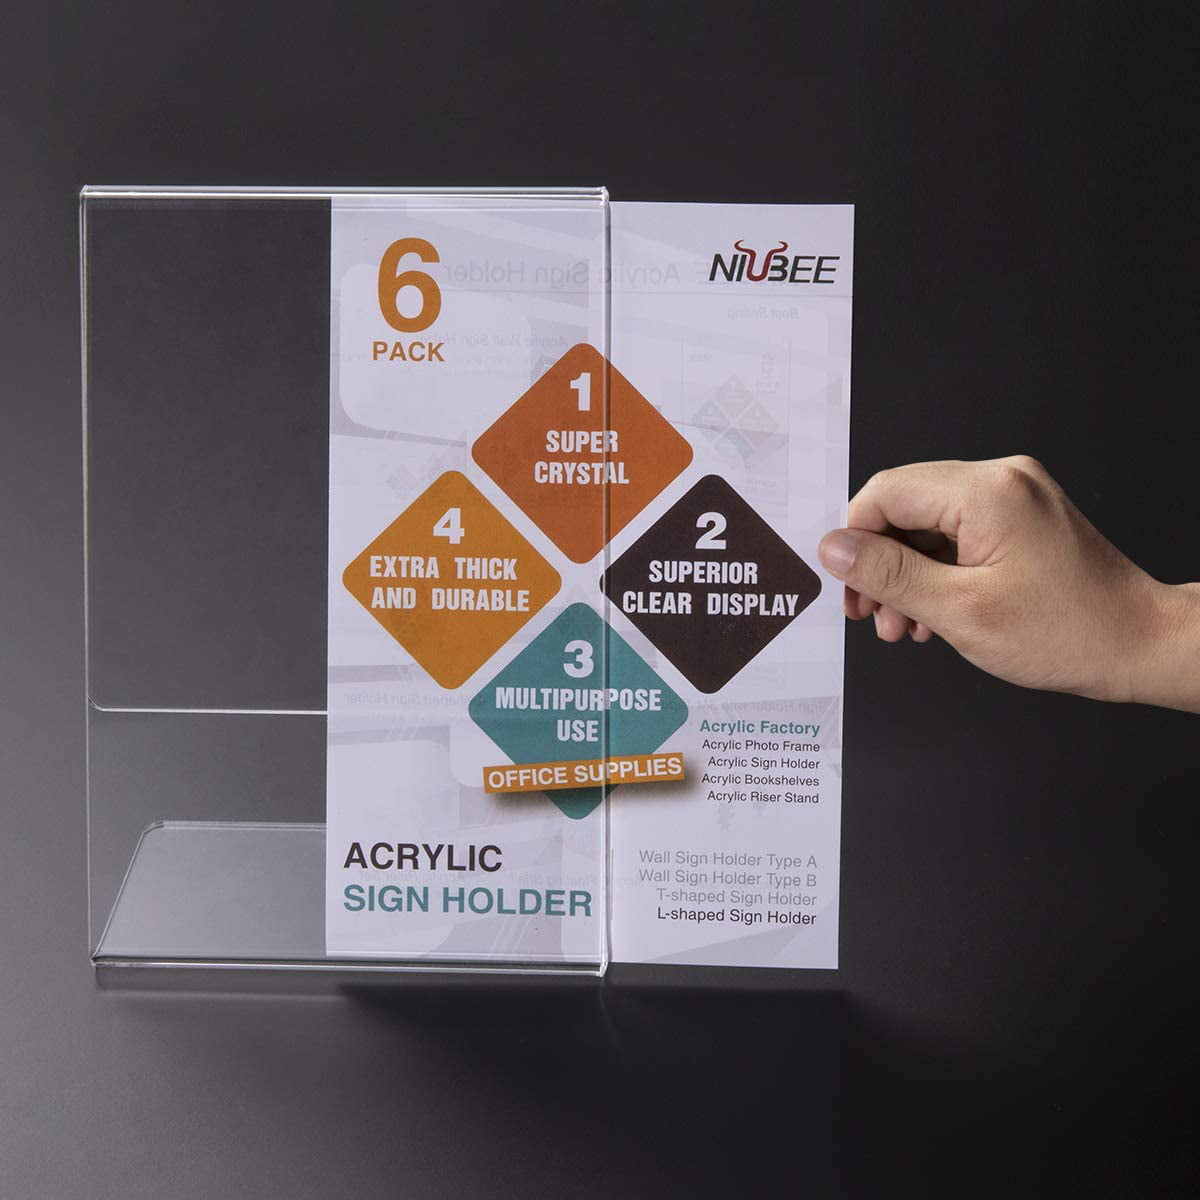 Plastic Paper Flyer Display Holder Restaurant -Landscape Slant Back Clear Frames Document Menu Table Stand for Office NIUBEE Acrylic Sign Holder 8.5x11 Inches 6 Pack Horizontal Store 